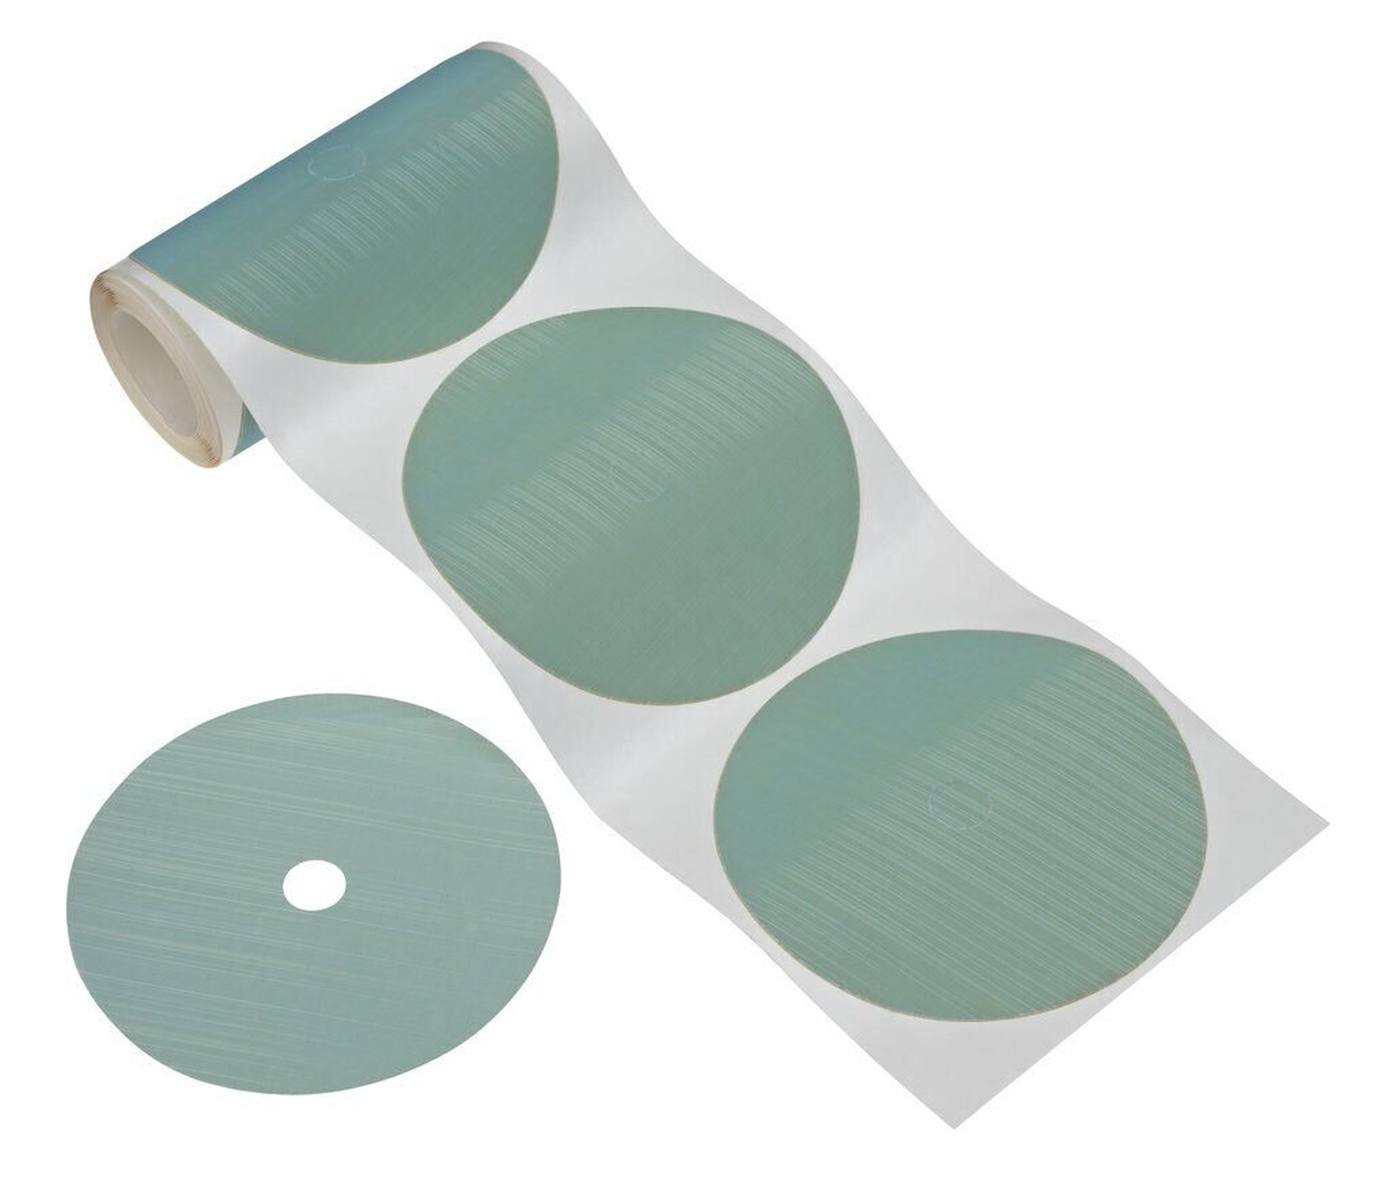 3M Trizact Structured film disc 268XA, 127mmx3,175m, green, A035, (roll of 25 discs) #88930